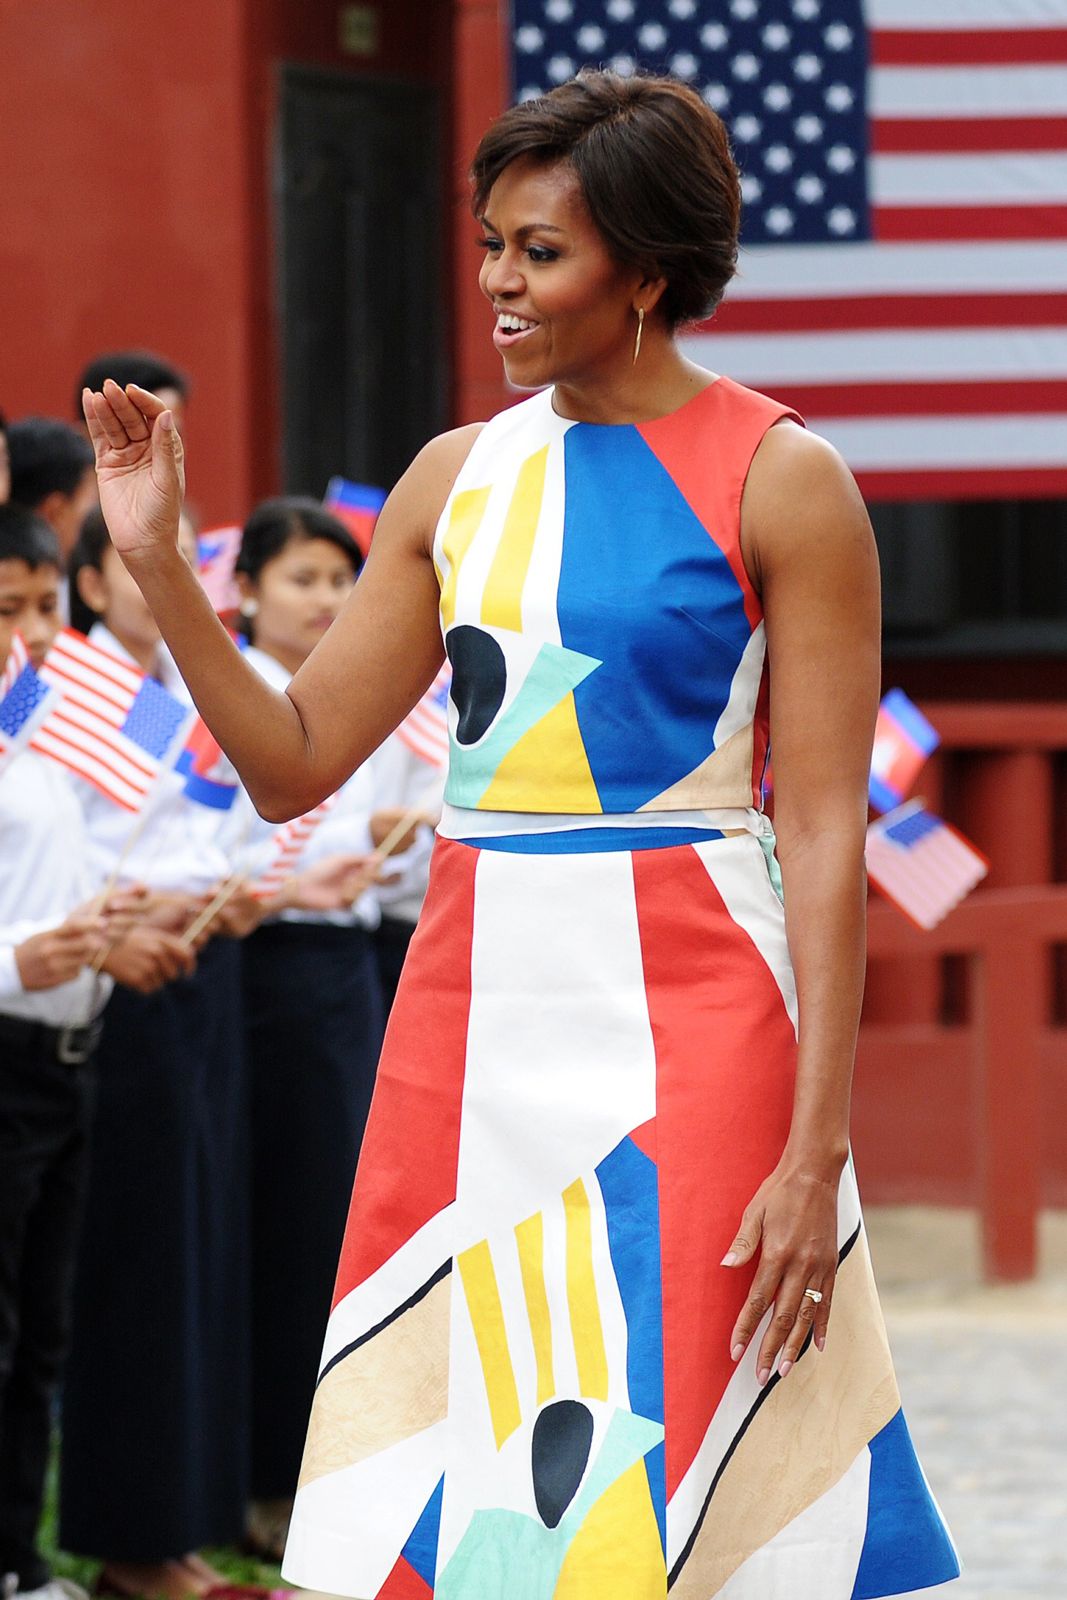 16 american designers reflect on michelle obama’s incredible fashion legacy